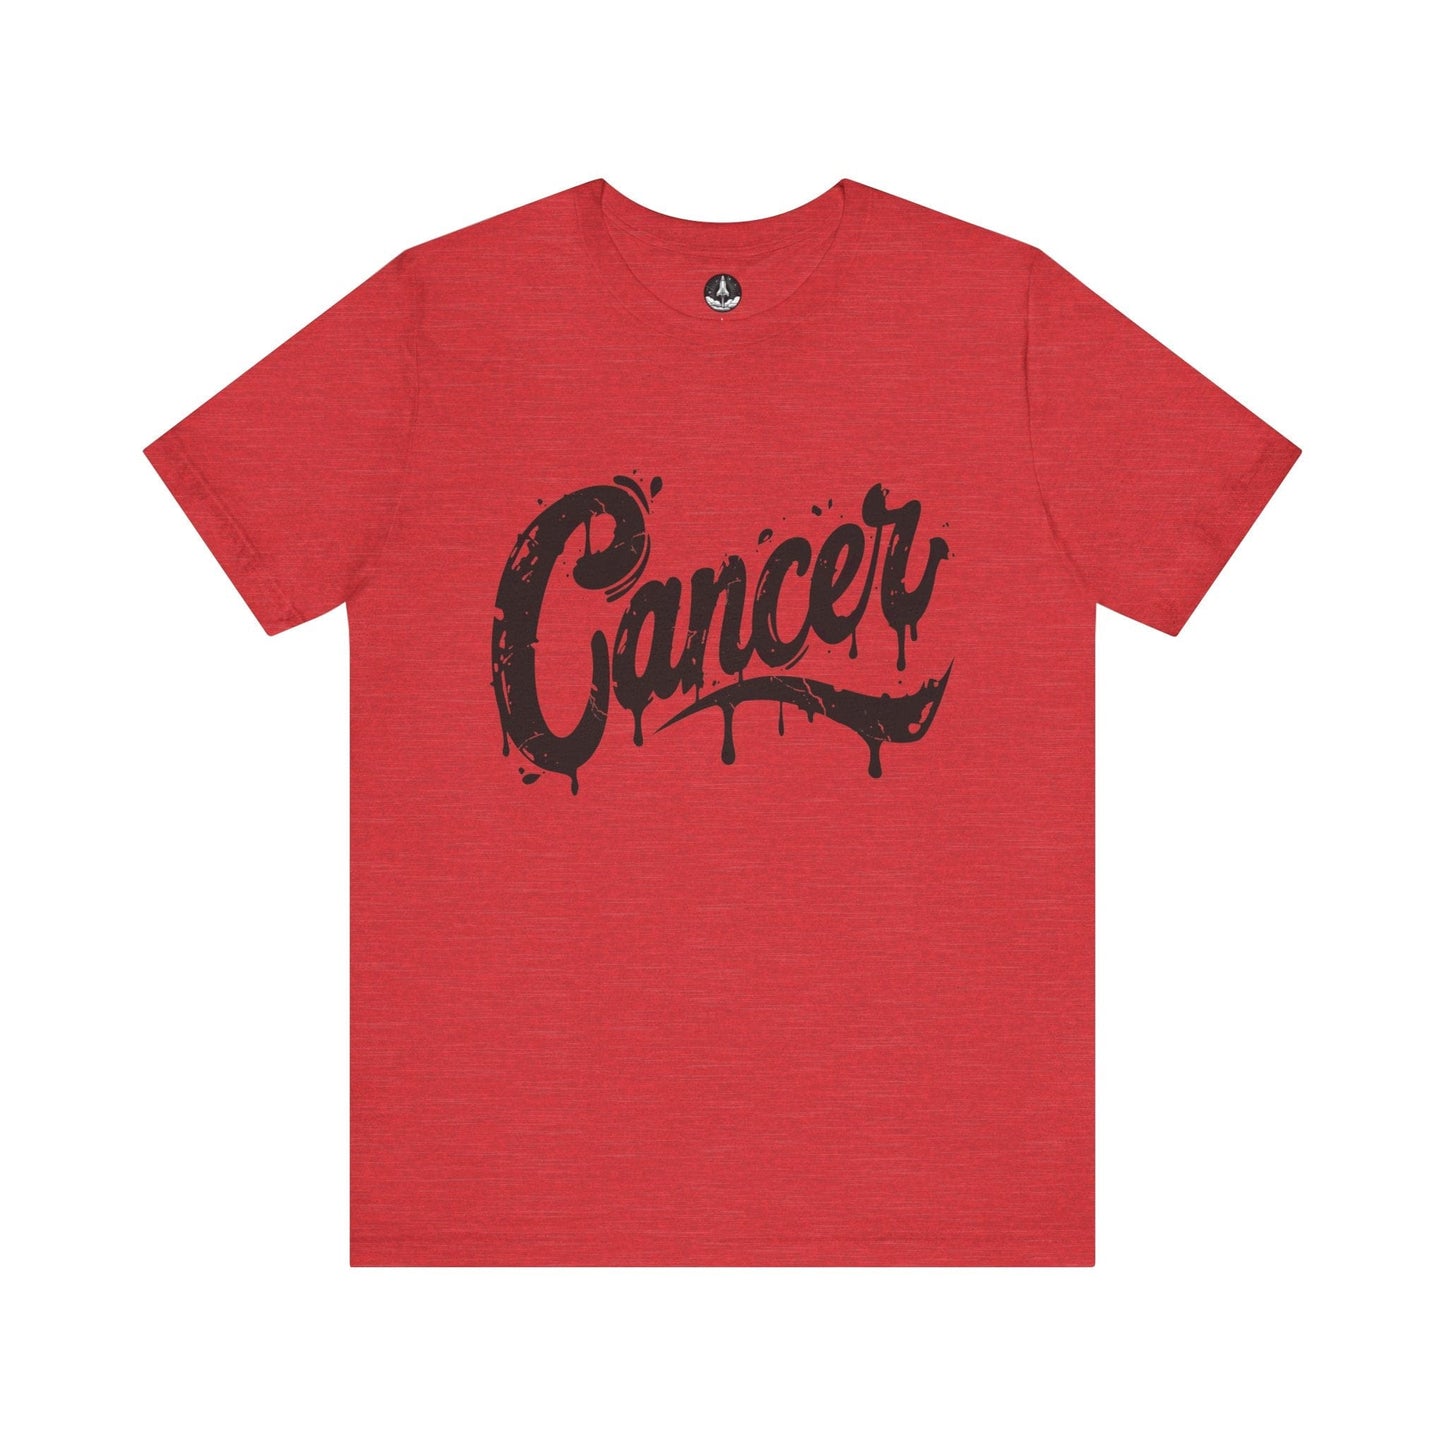 T-Shirt Heather Red / S Tidal Emotion Cancer TShirt: Flow with Feeling